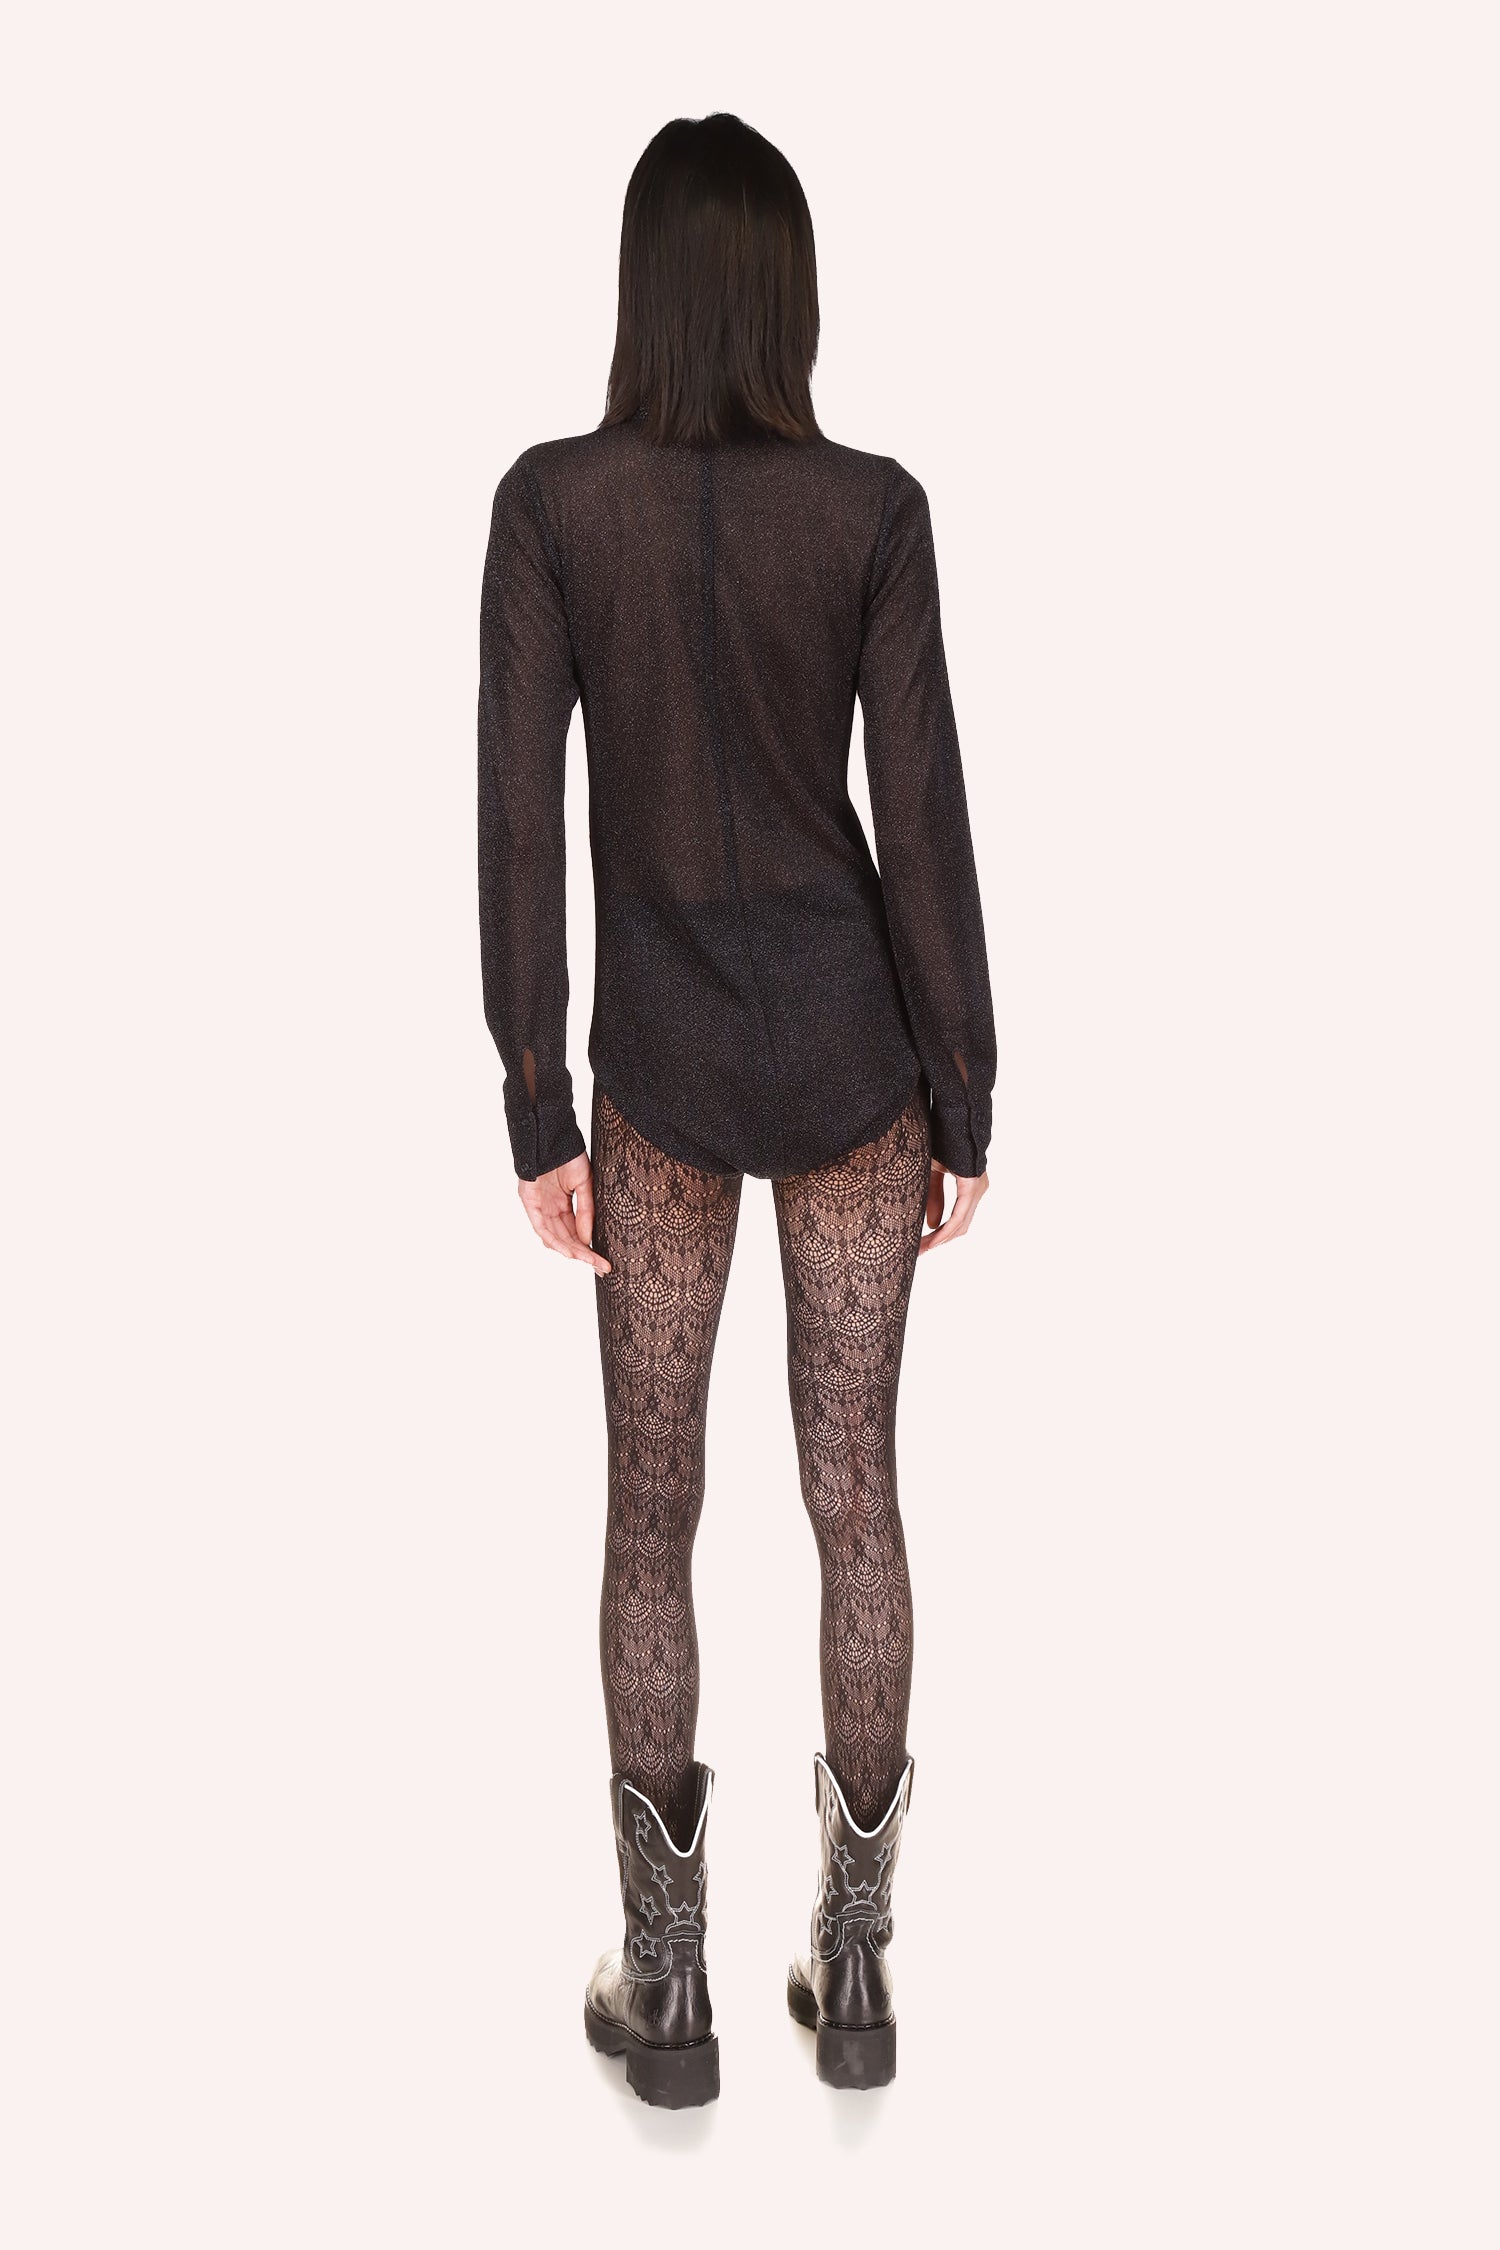 Black see-through material shoulders to hips, long sleeves, black zipper on the back